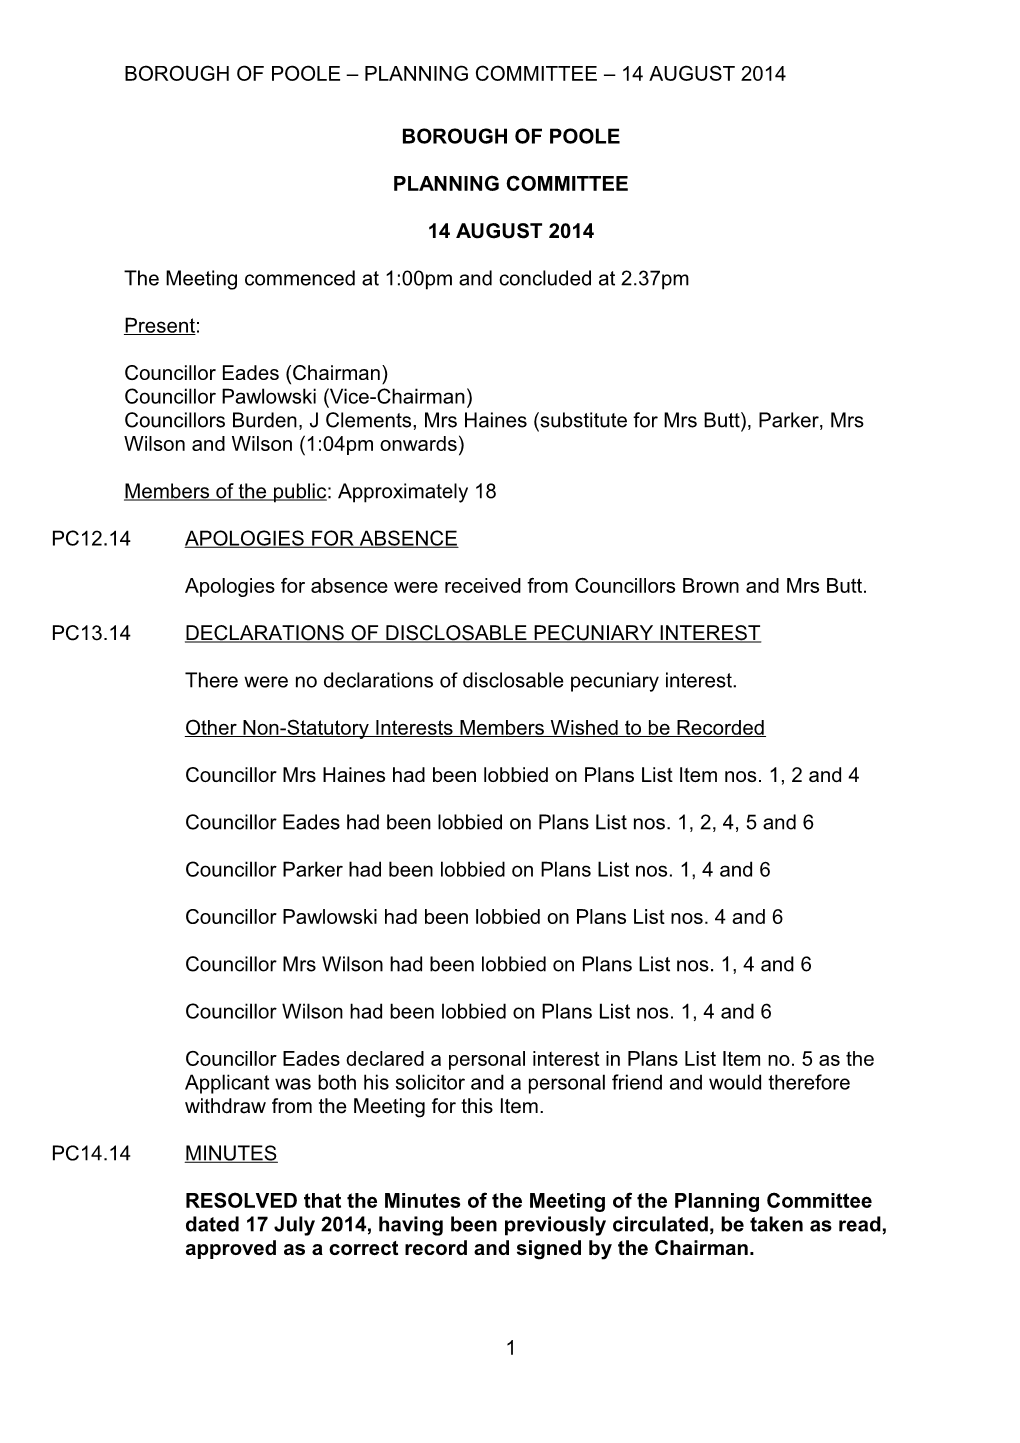 Borough of Poole Planning Committee 14 August 2014